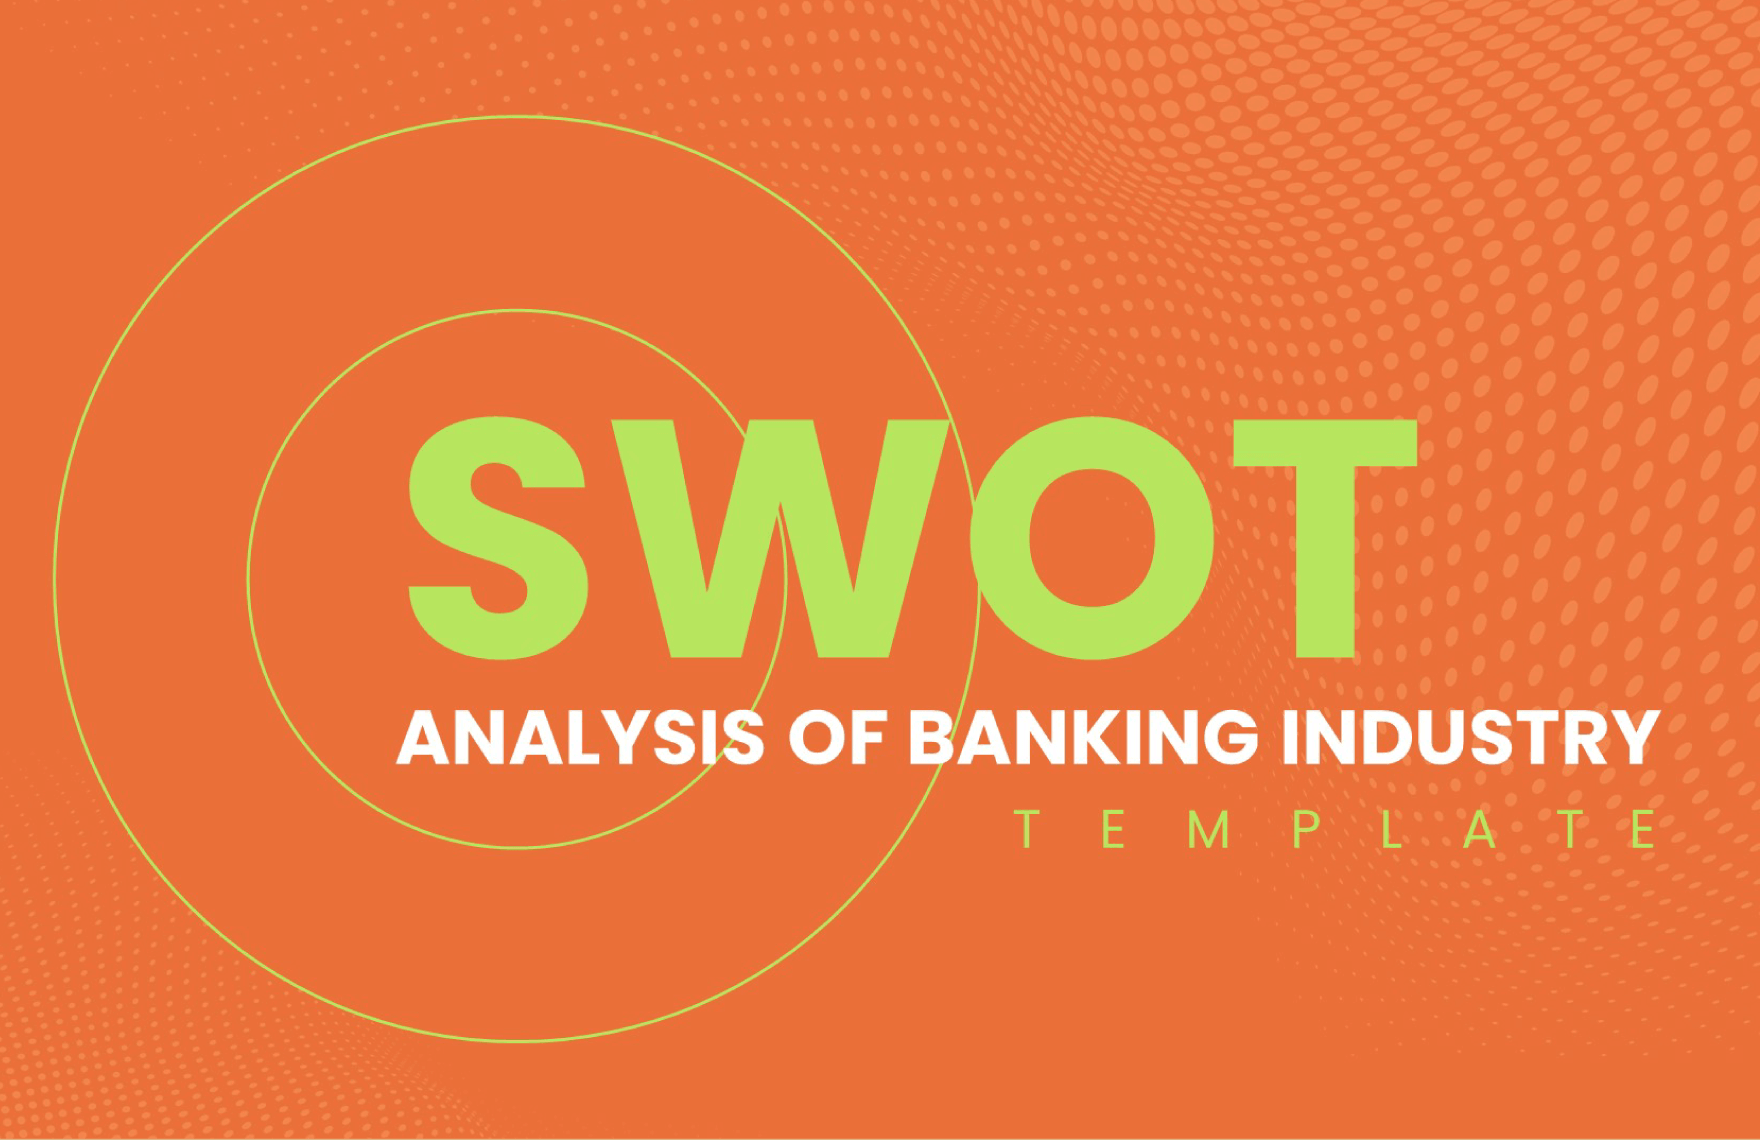 SWOT Analysis of Banking Industry Template